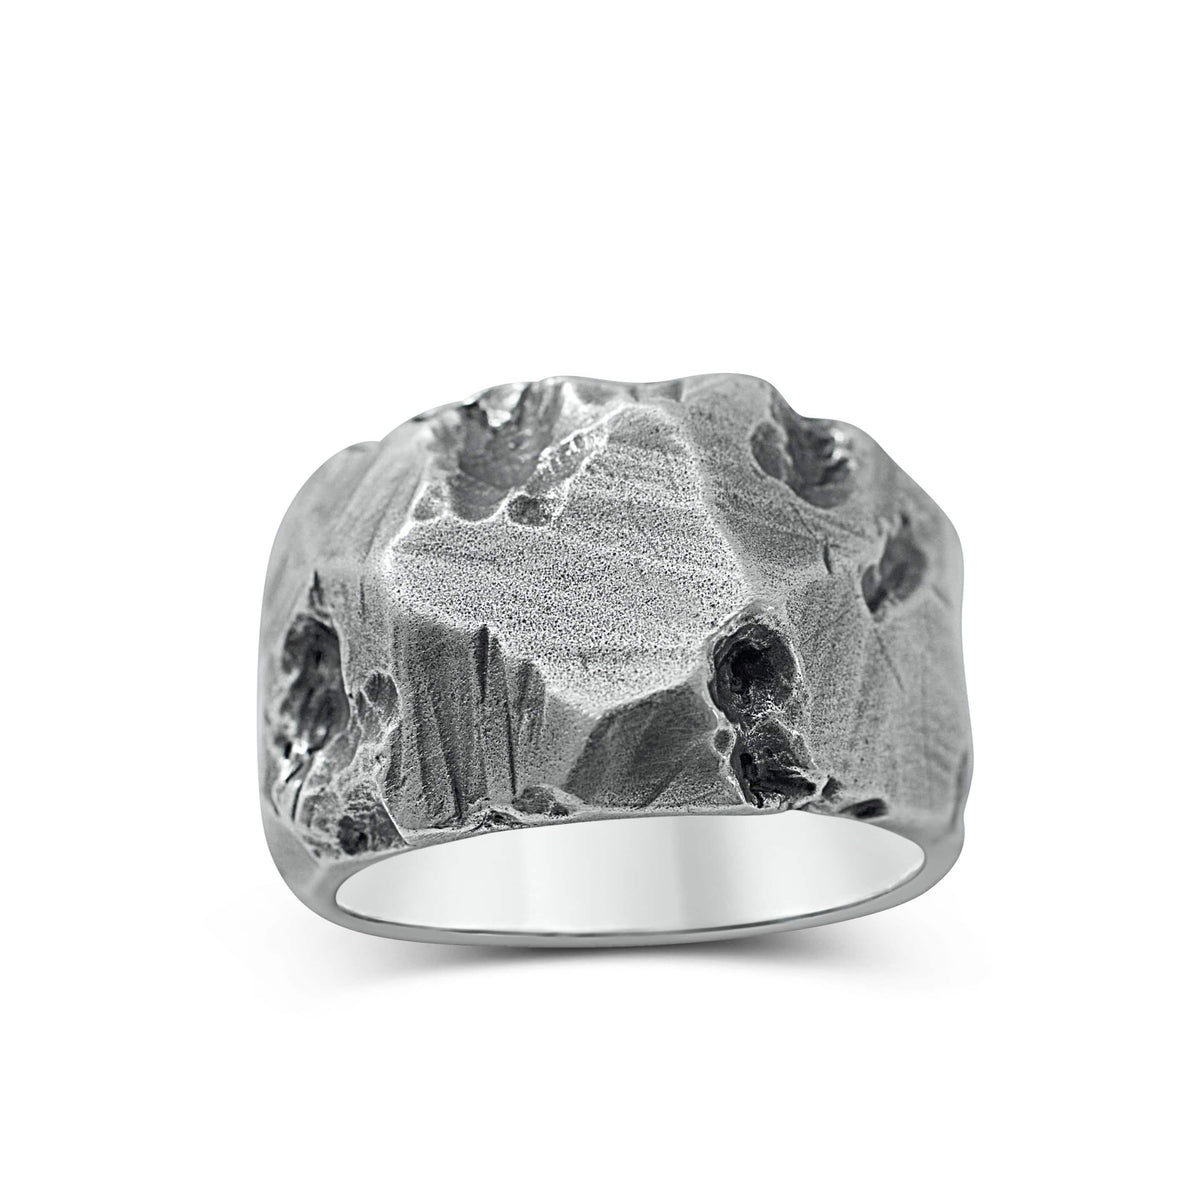 Men's ring Band carved raw - Black Rock Jewel